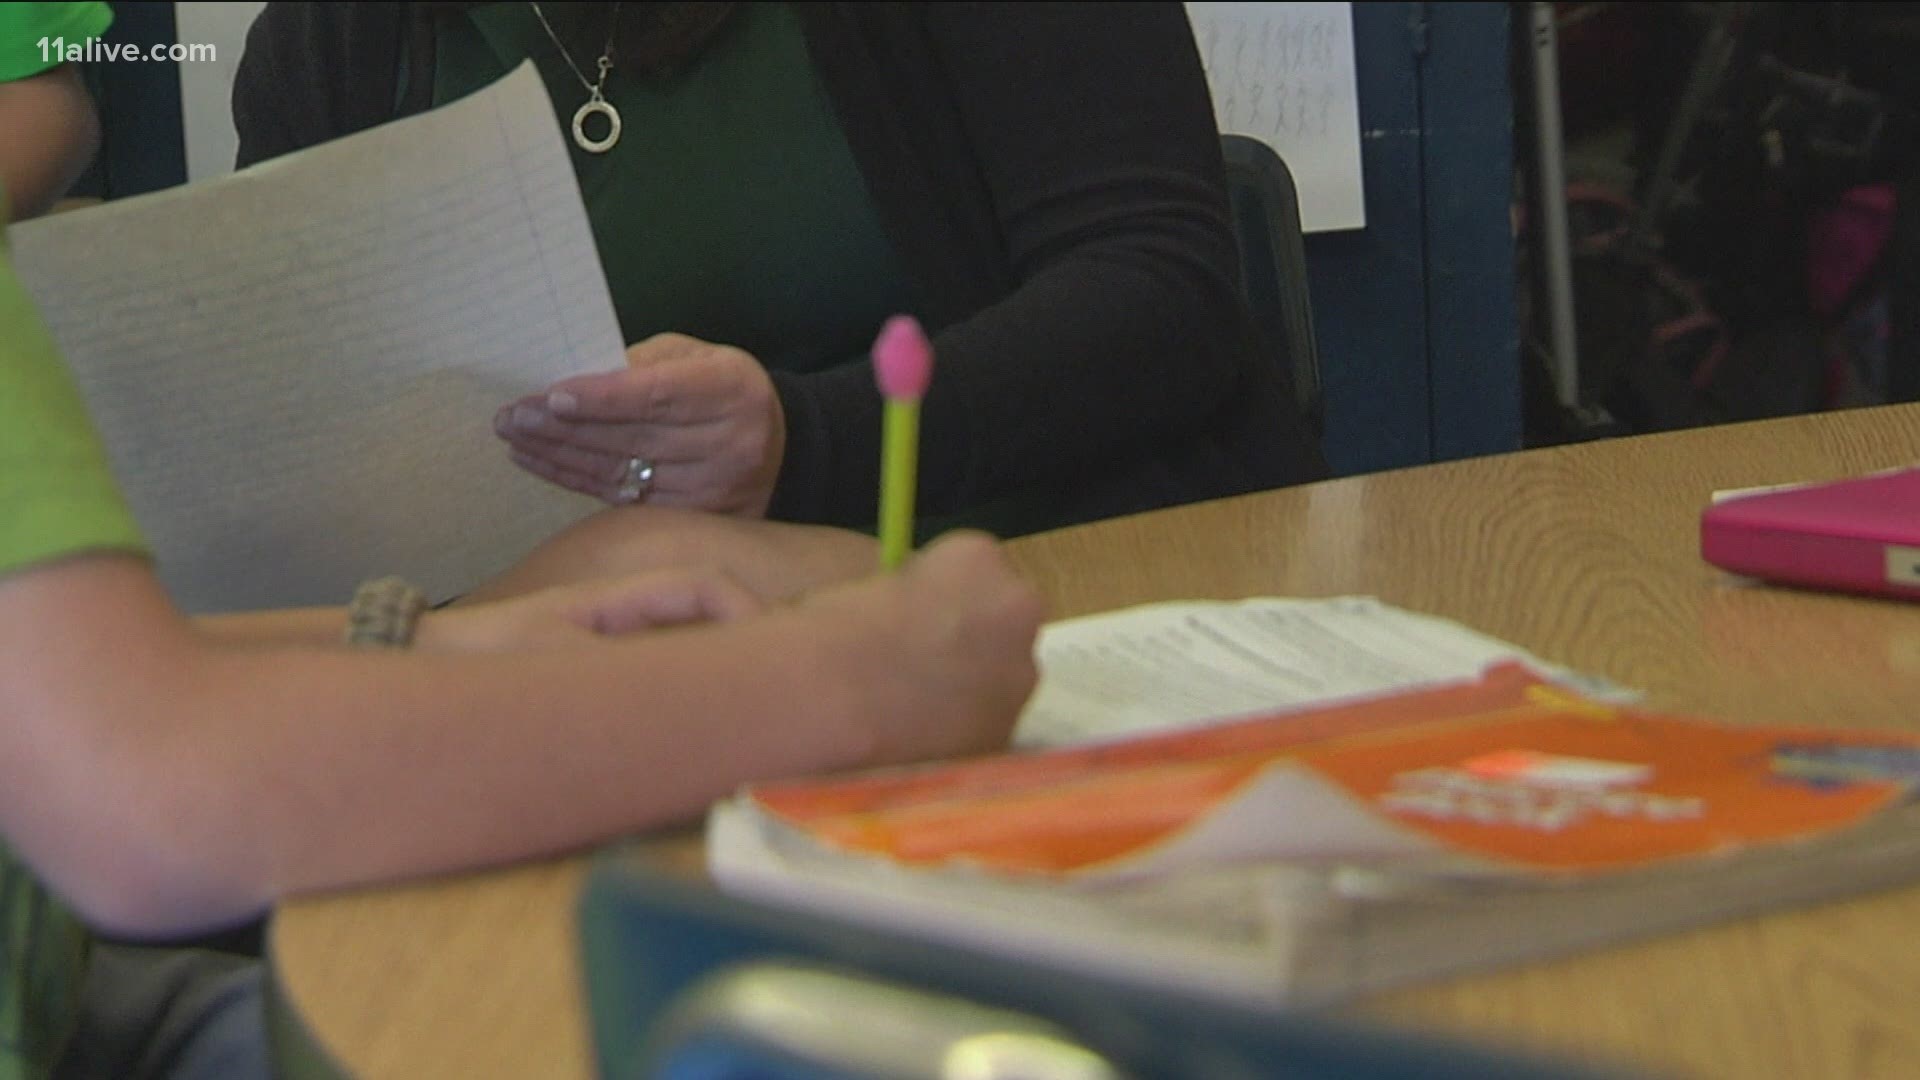 With educators about to become eligible, now the question becomes how they'll get the vaccine. 11Alive spoke to several districts about their plans.